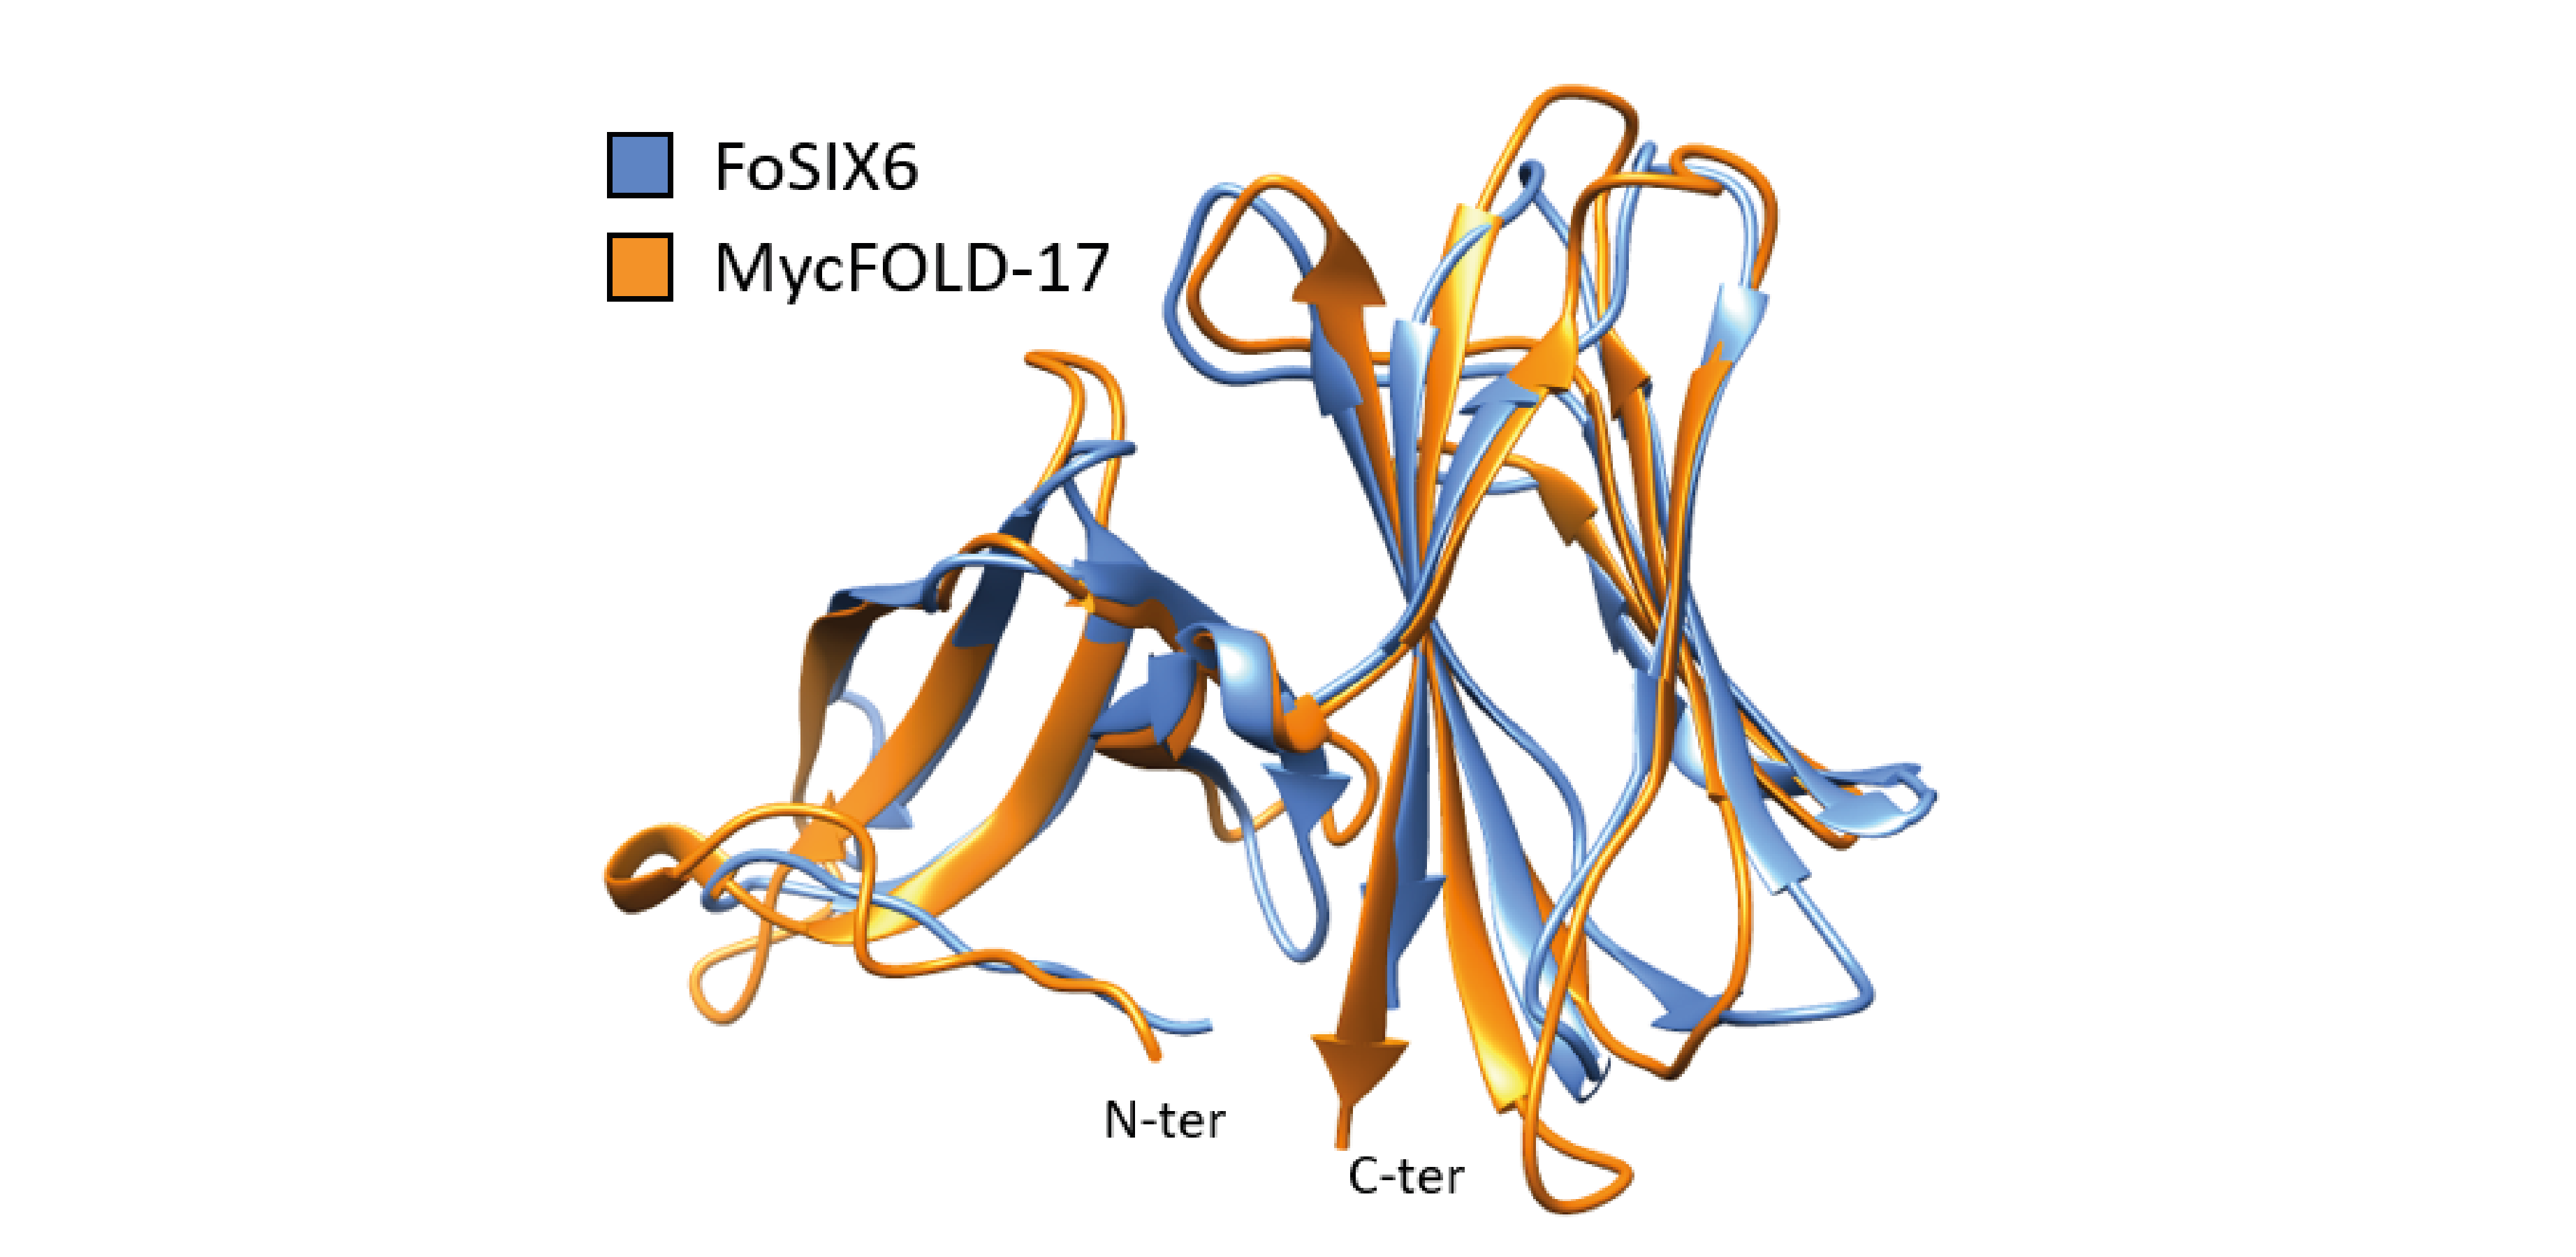 Models of the structures of FOLD proteins from a pathogen (blue) and a symbiotic fungus (orange) superimposed onto each other to show how similar they are. Image by Albin Teulet